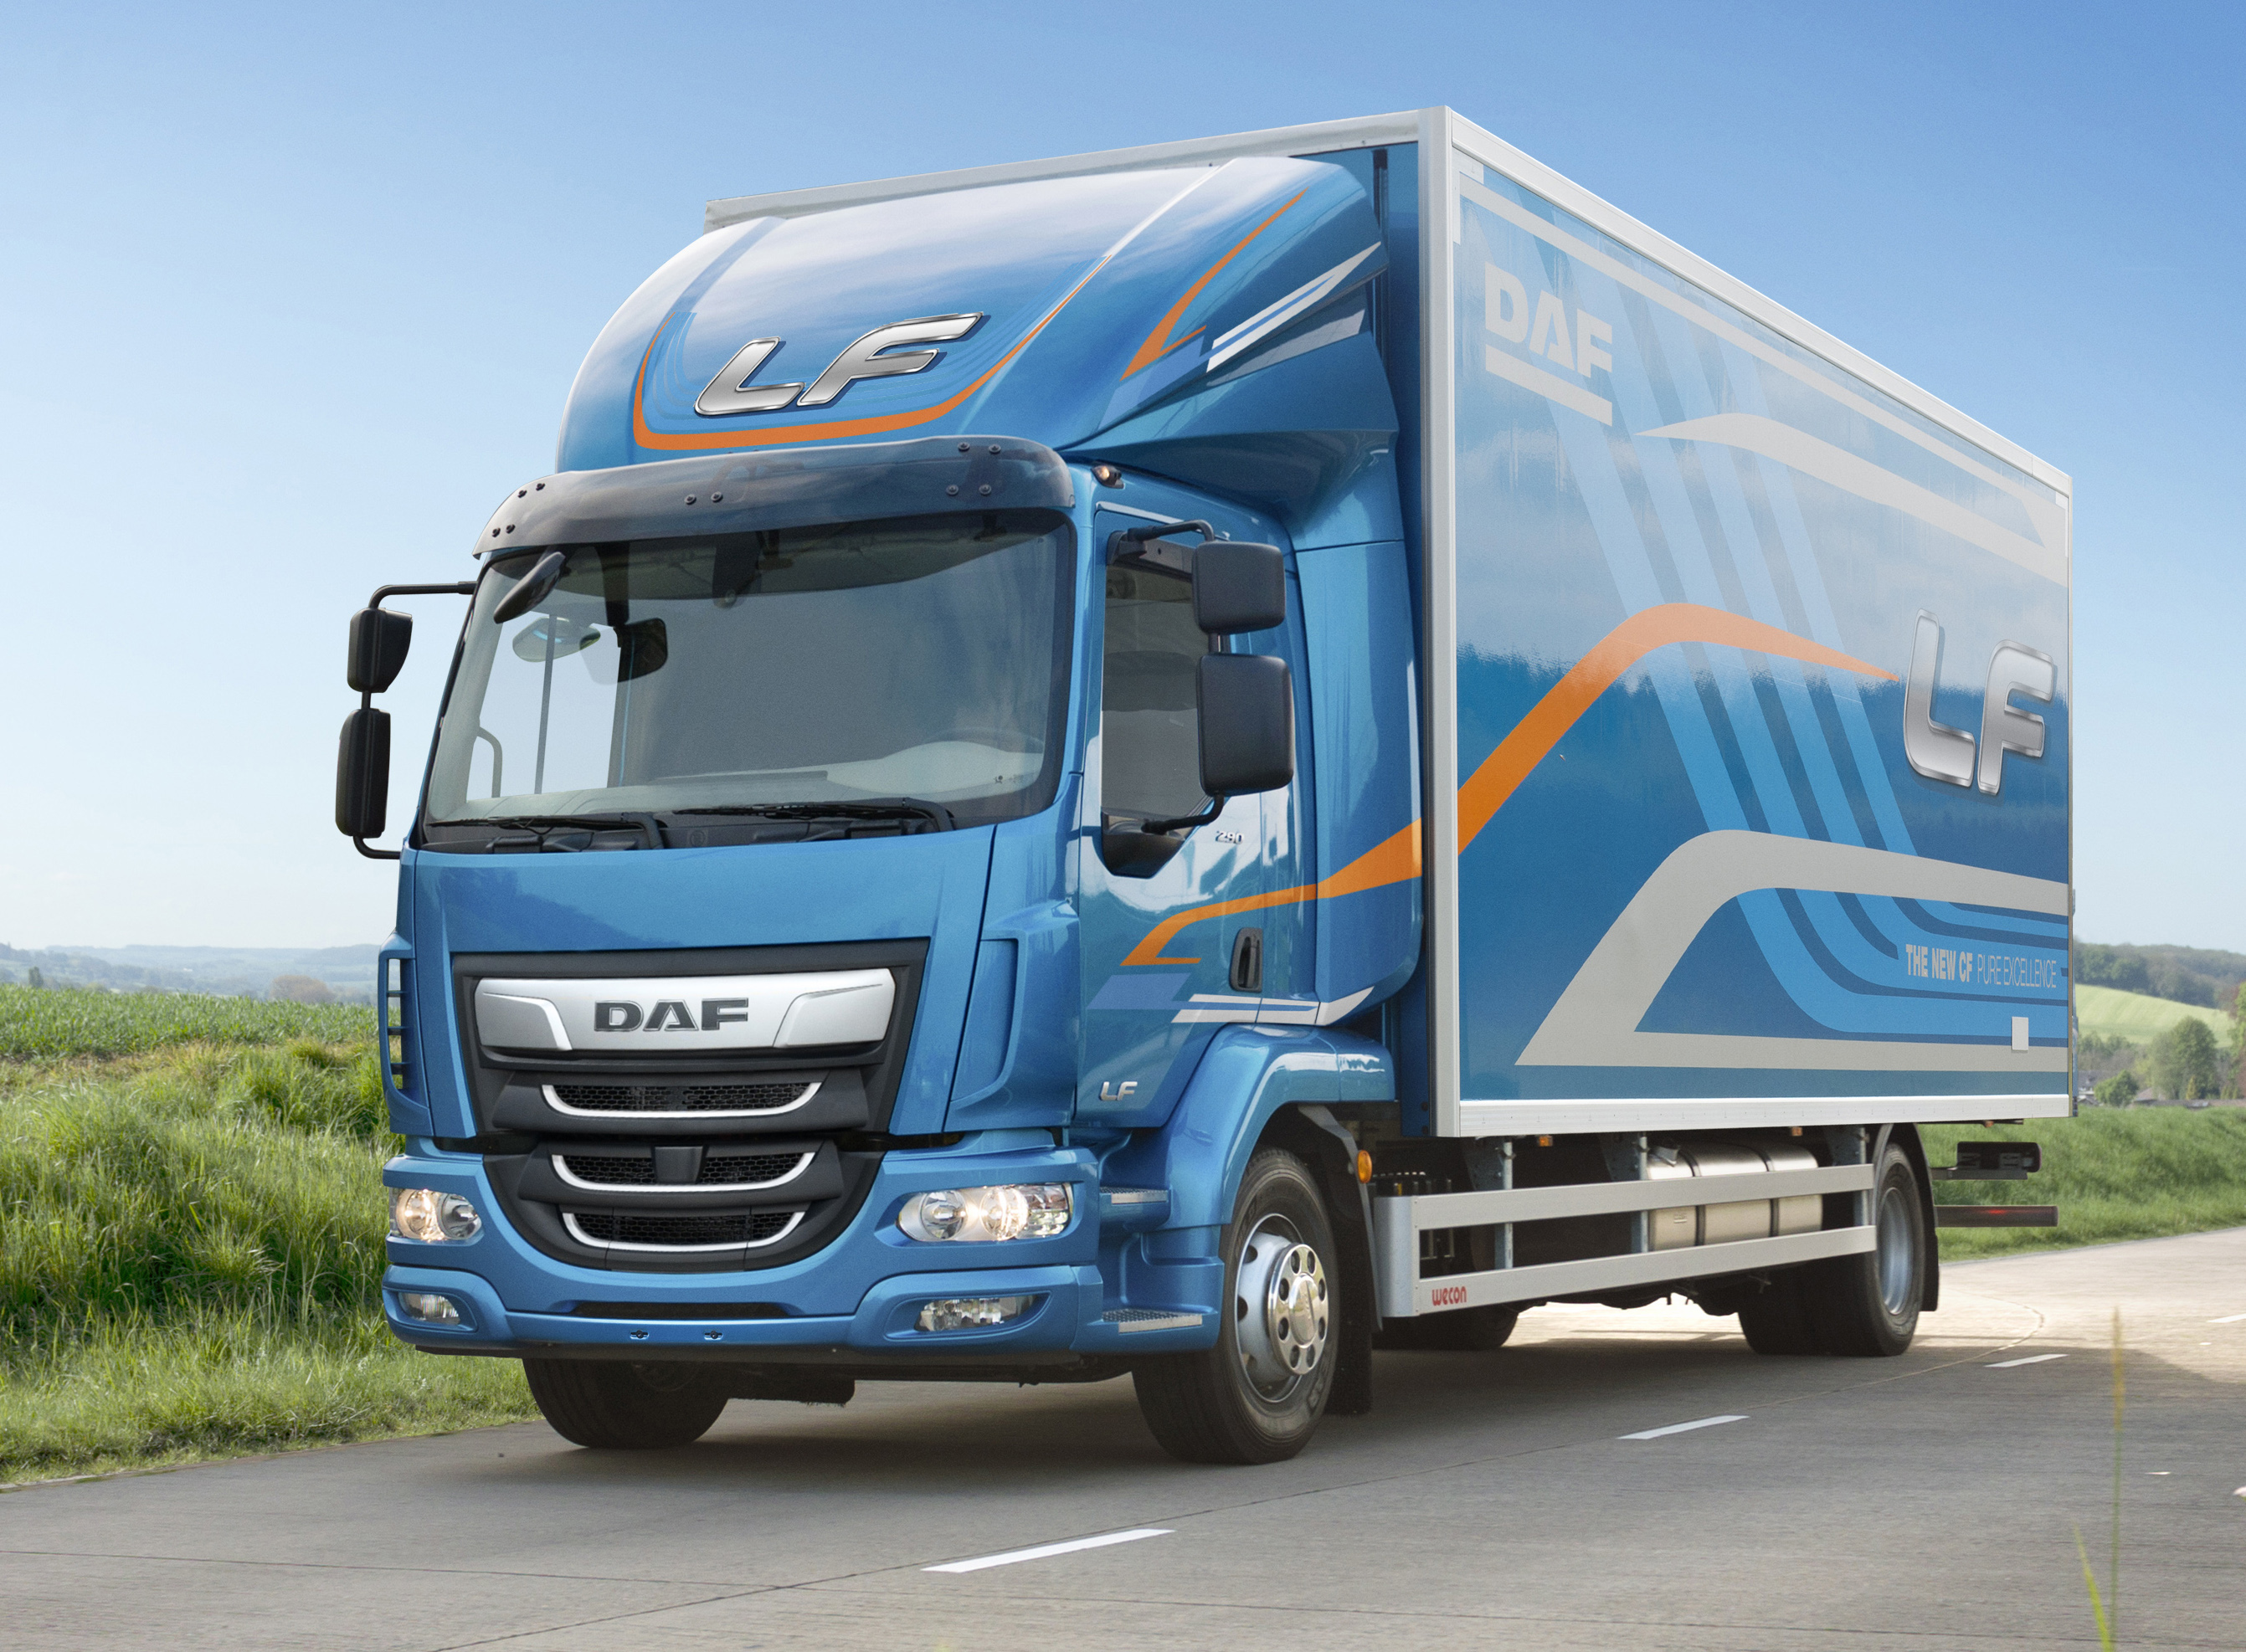 PACCAR Achieves Excellent Quarterly Revenues and Earnings - DAF Trucks N.V.